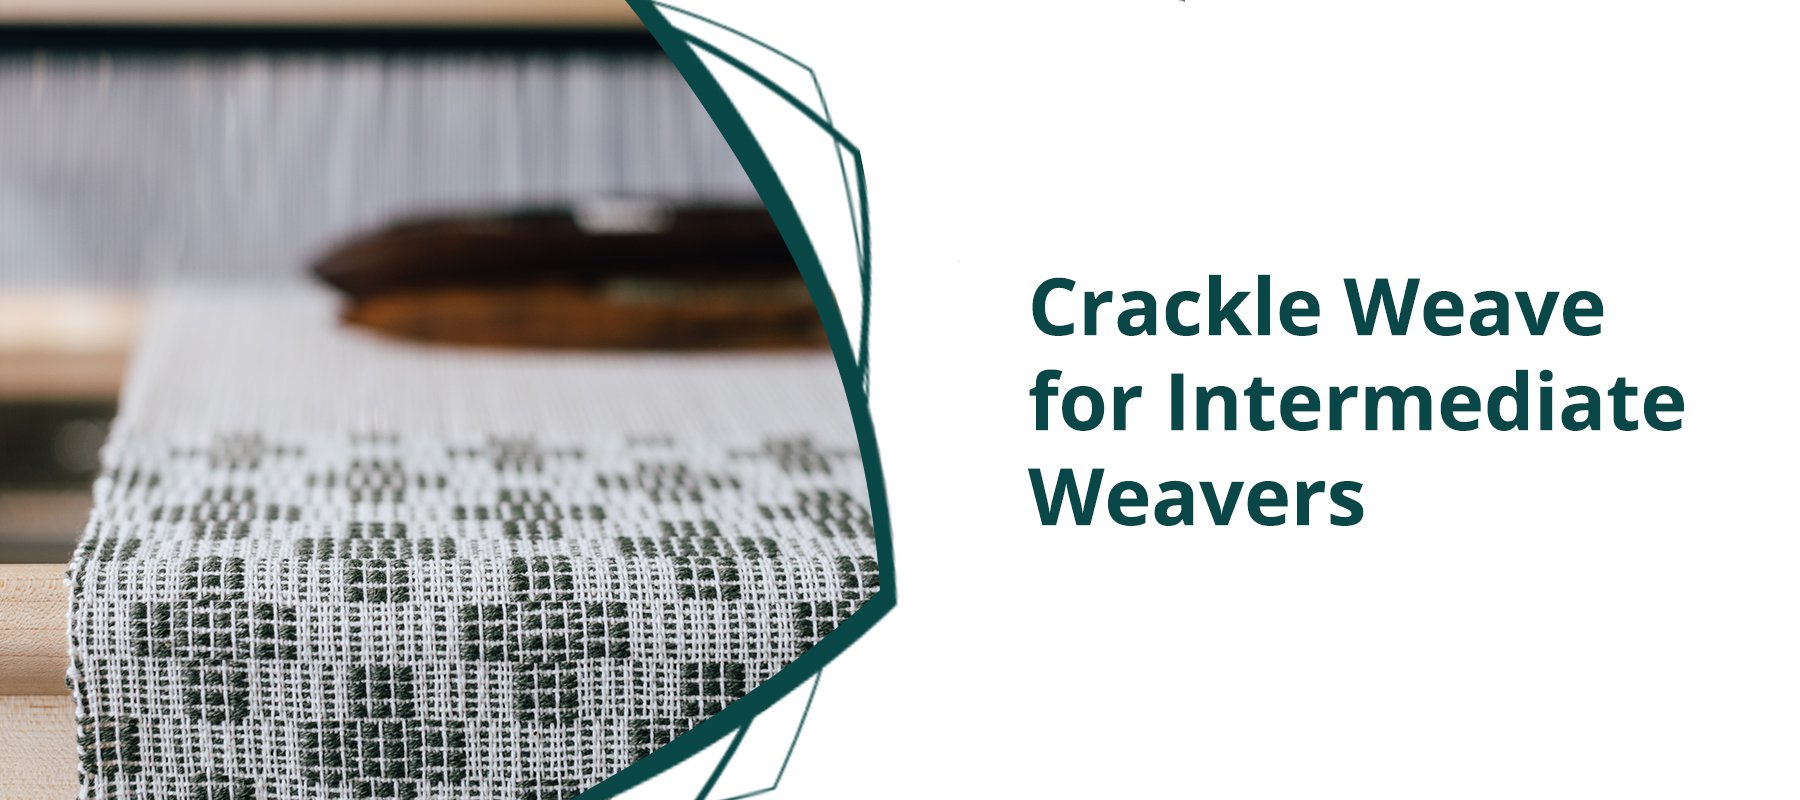 Crackle Weave: Exploring Weave Structures for Intermediate Weavers